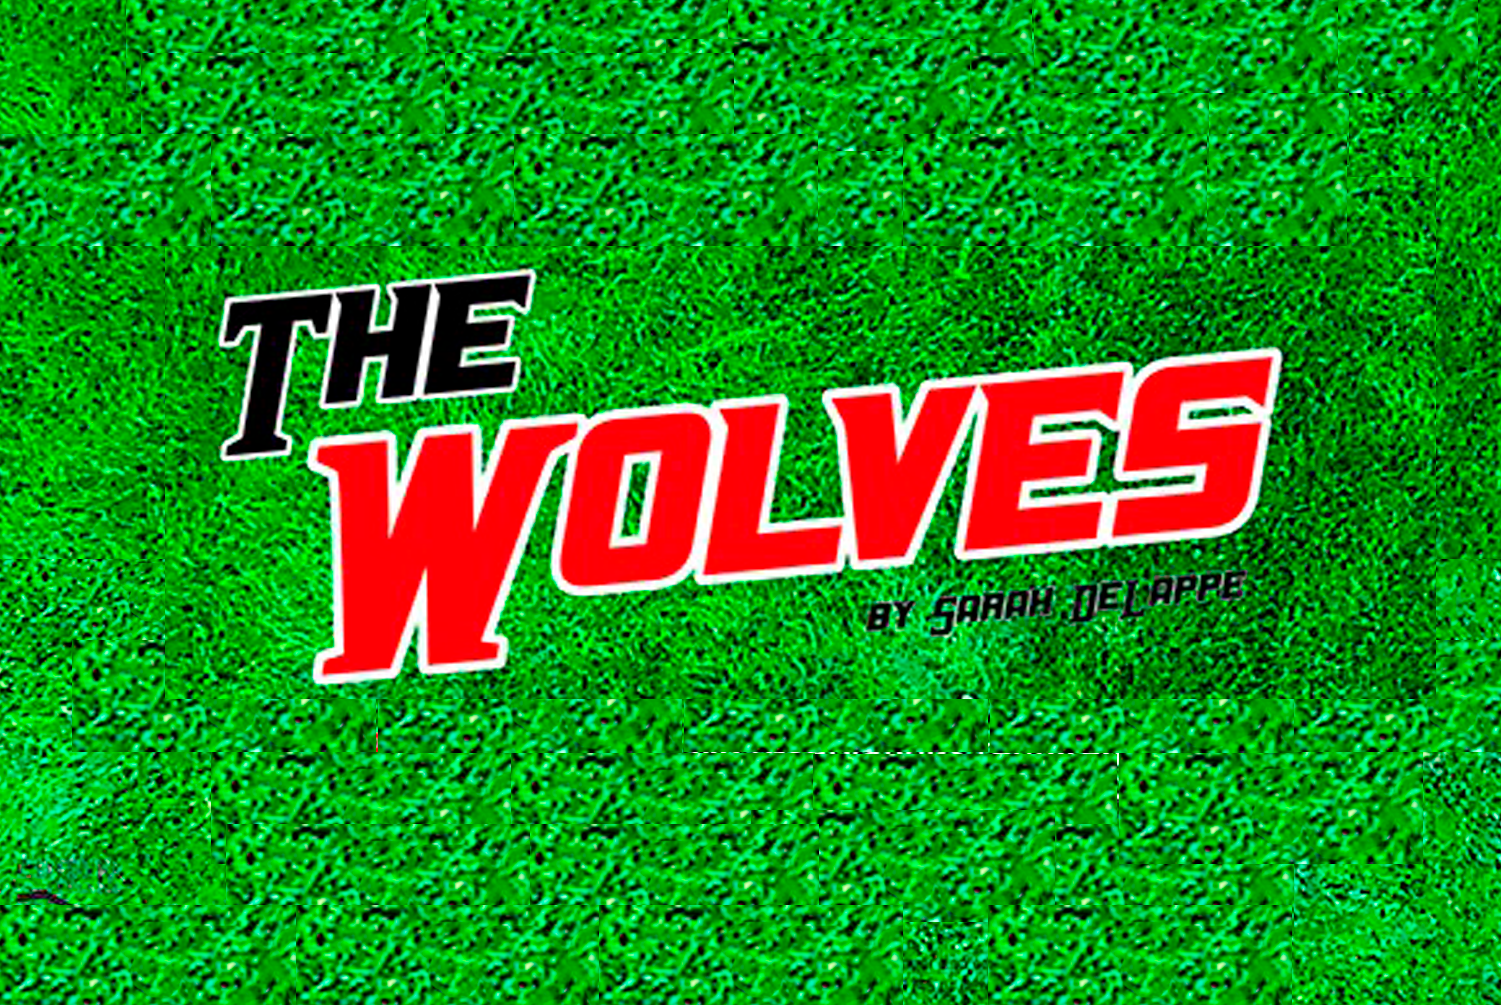 Centurys Playhouse Presents: The Wolves